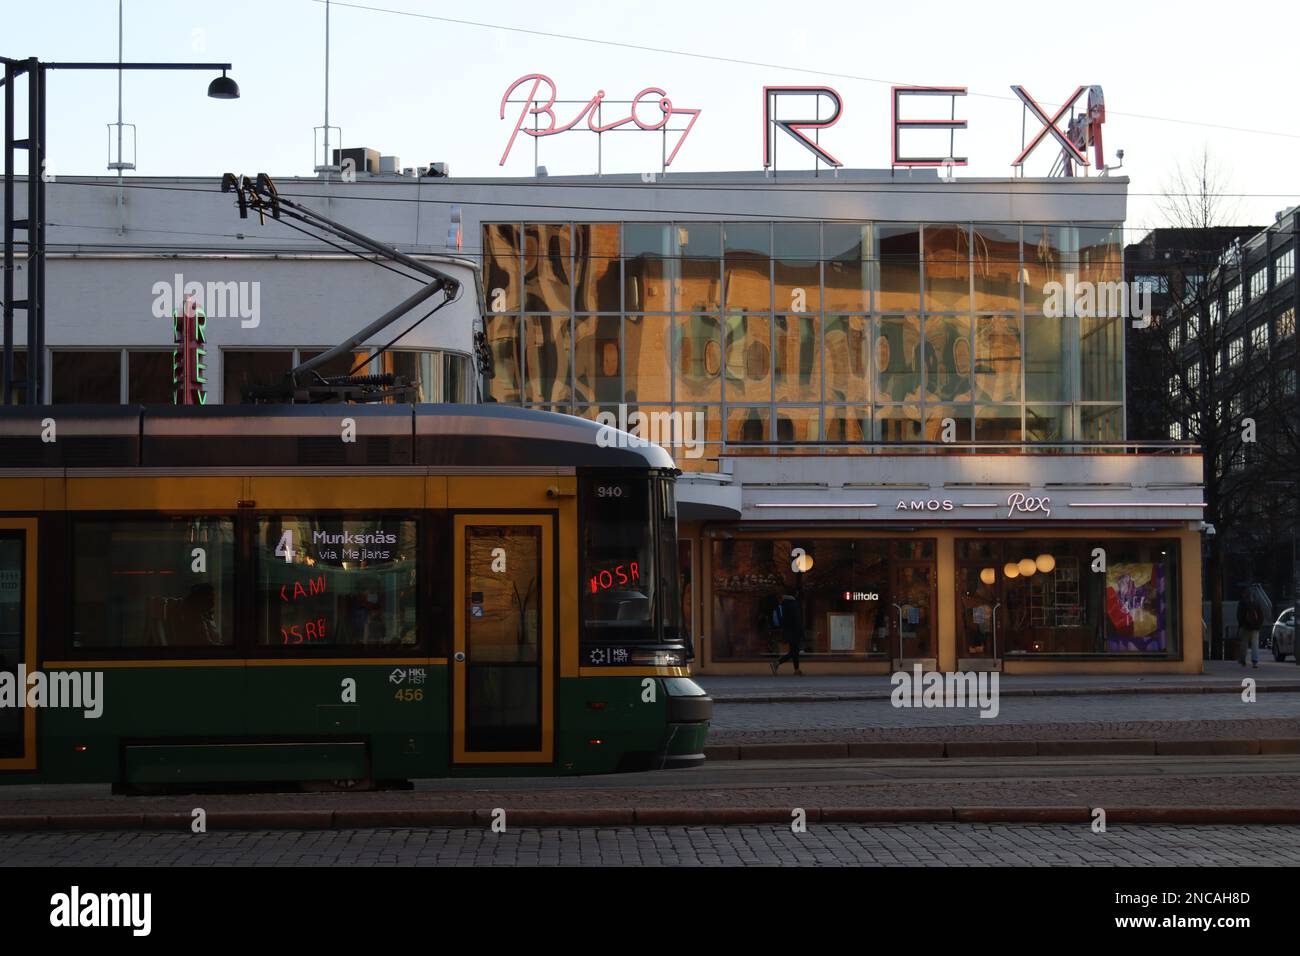 City center Helsinki, Finland, The entrance to Amos Rex Museum, sign, functionalist building, green old tram, public transport, Bio Rex at Lasipalatsi Stock Photo